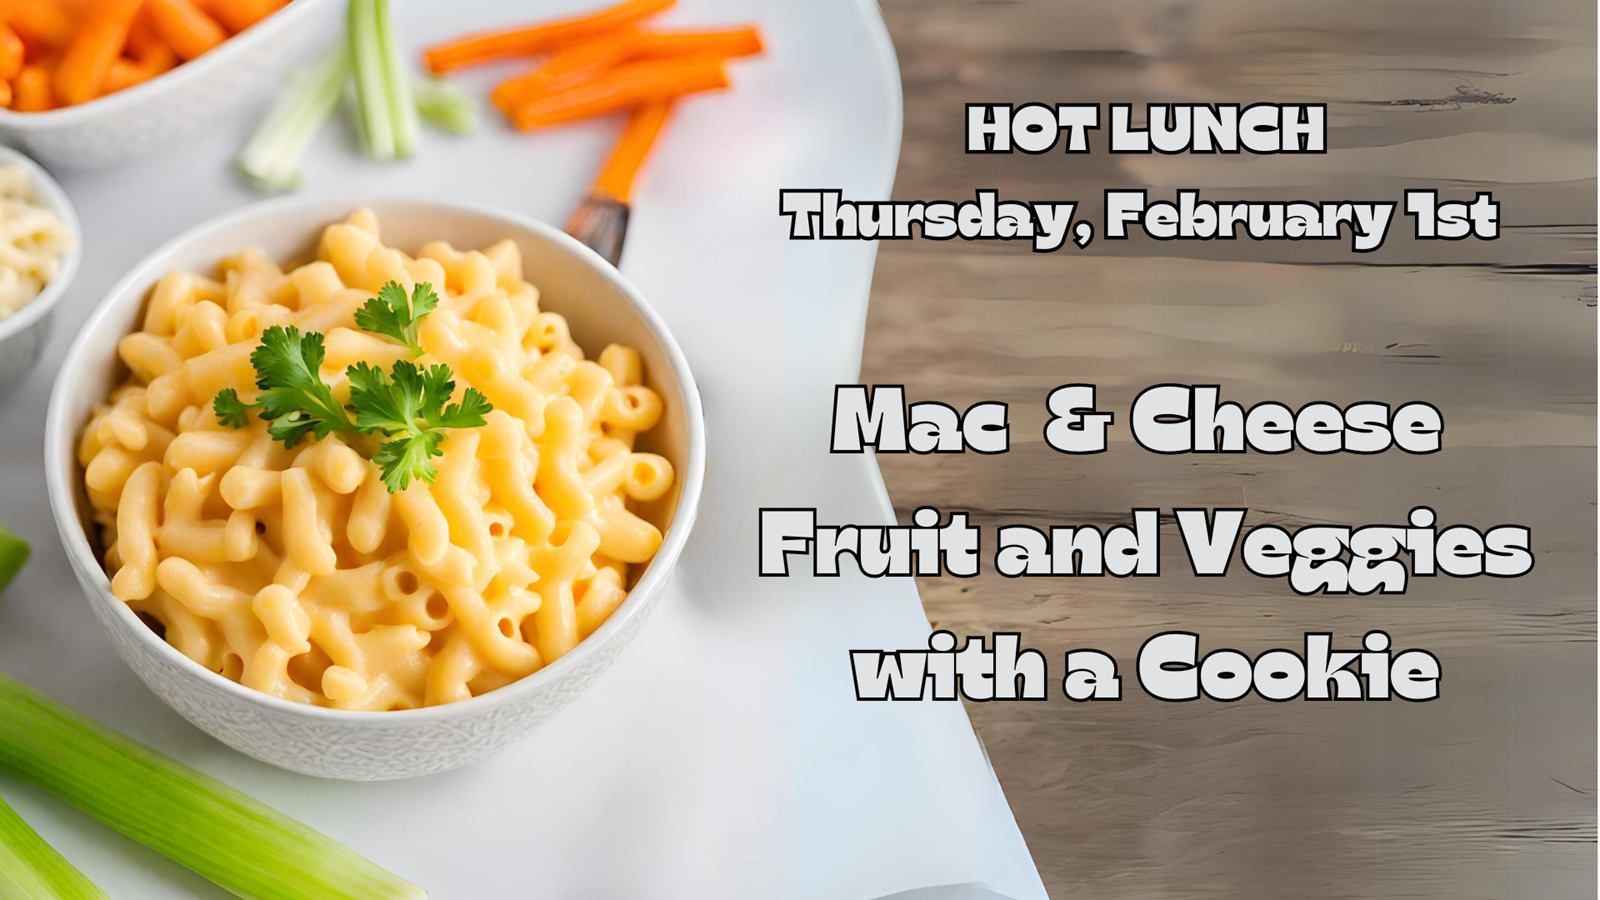 HOT%20LUNCH%20Thursday,%20February%201st%20(1).png